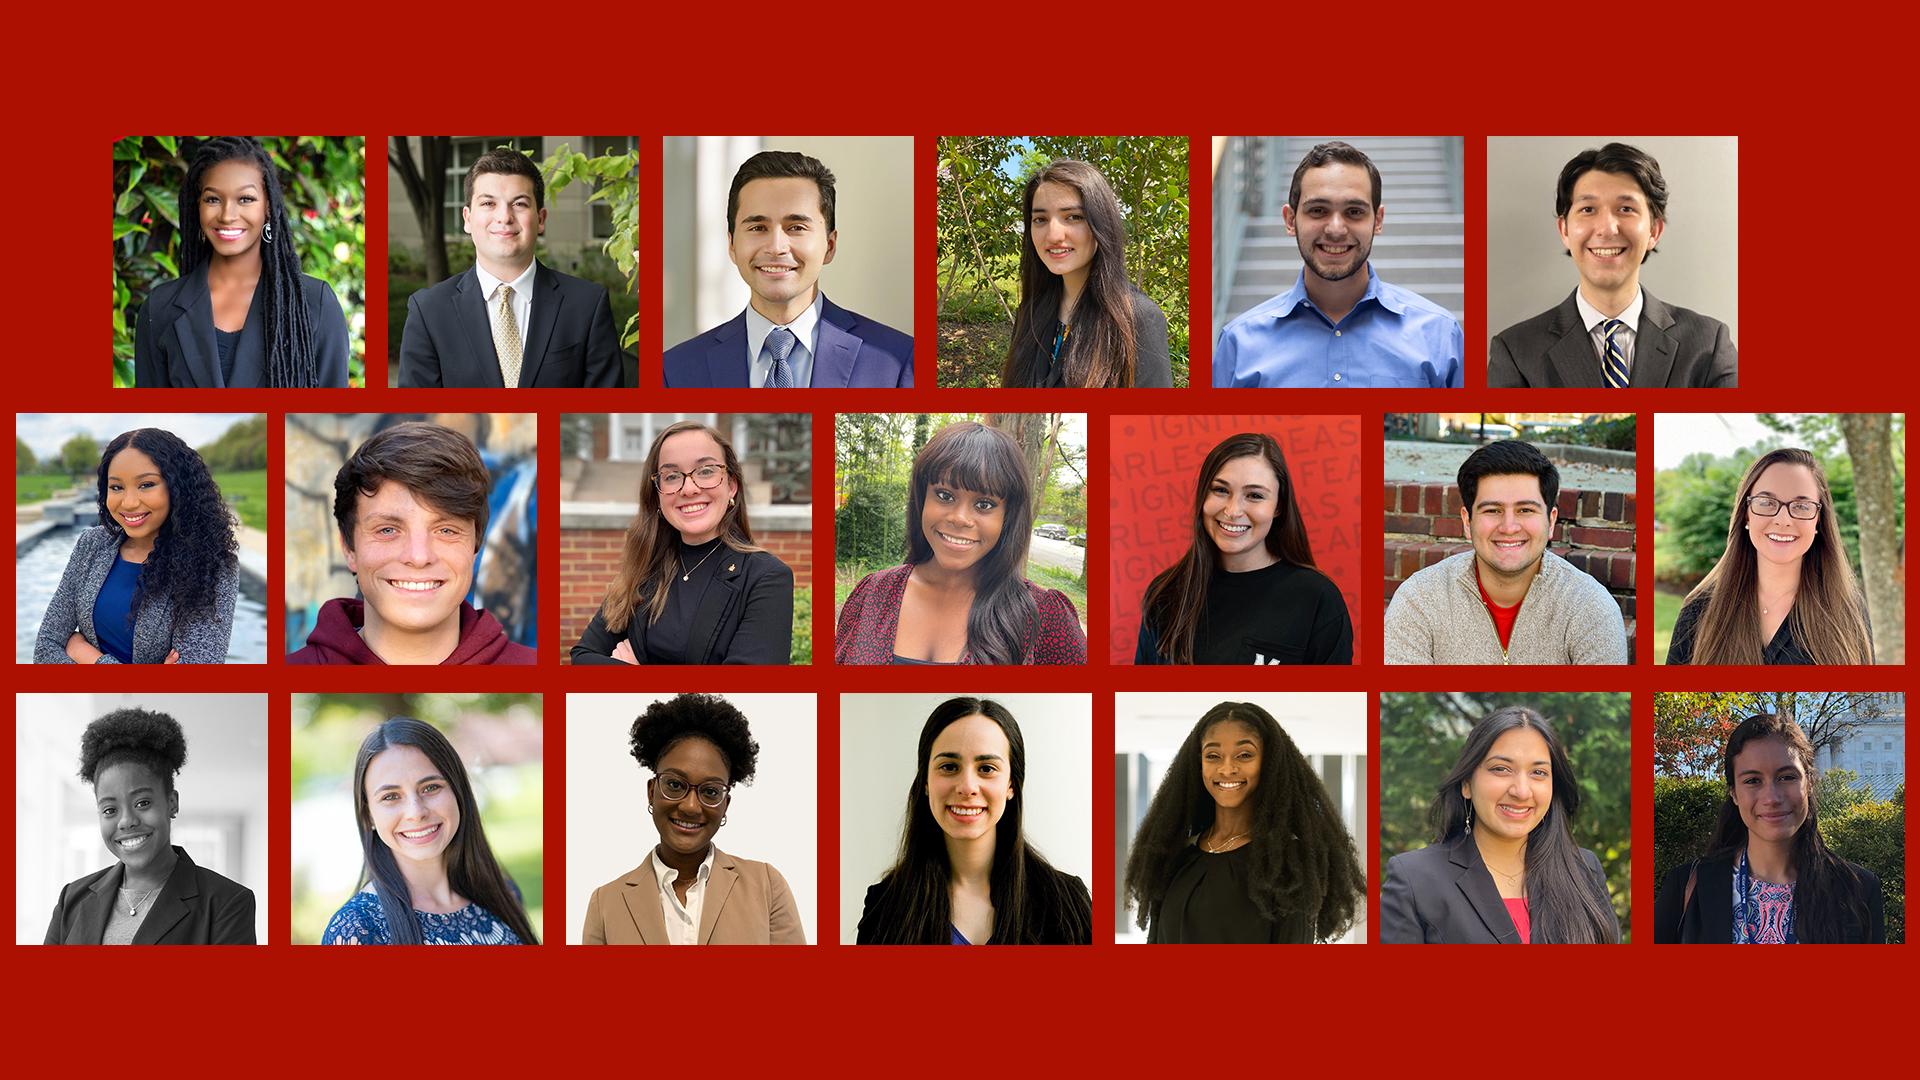 Red background with photos of 20 Medallion members from the University of Maryland.